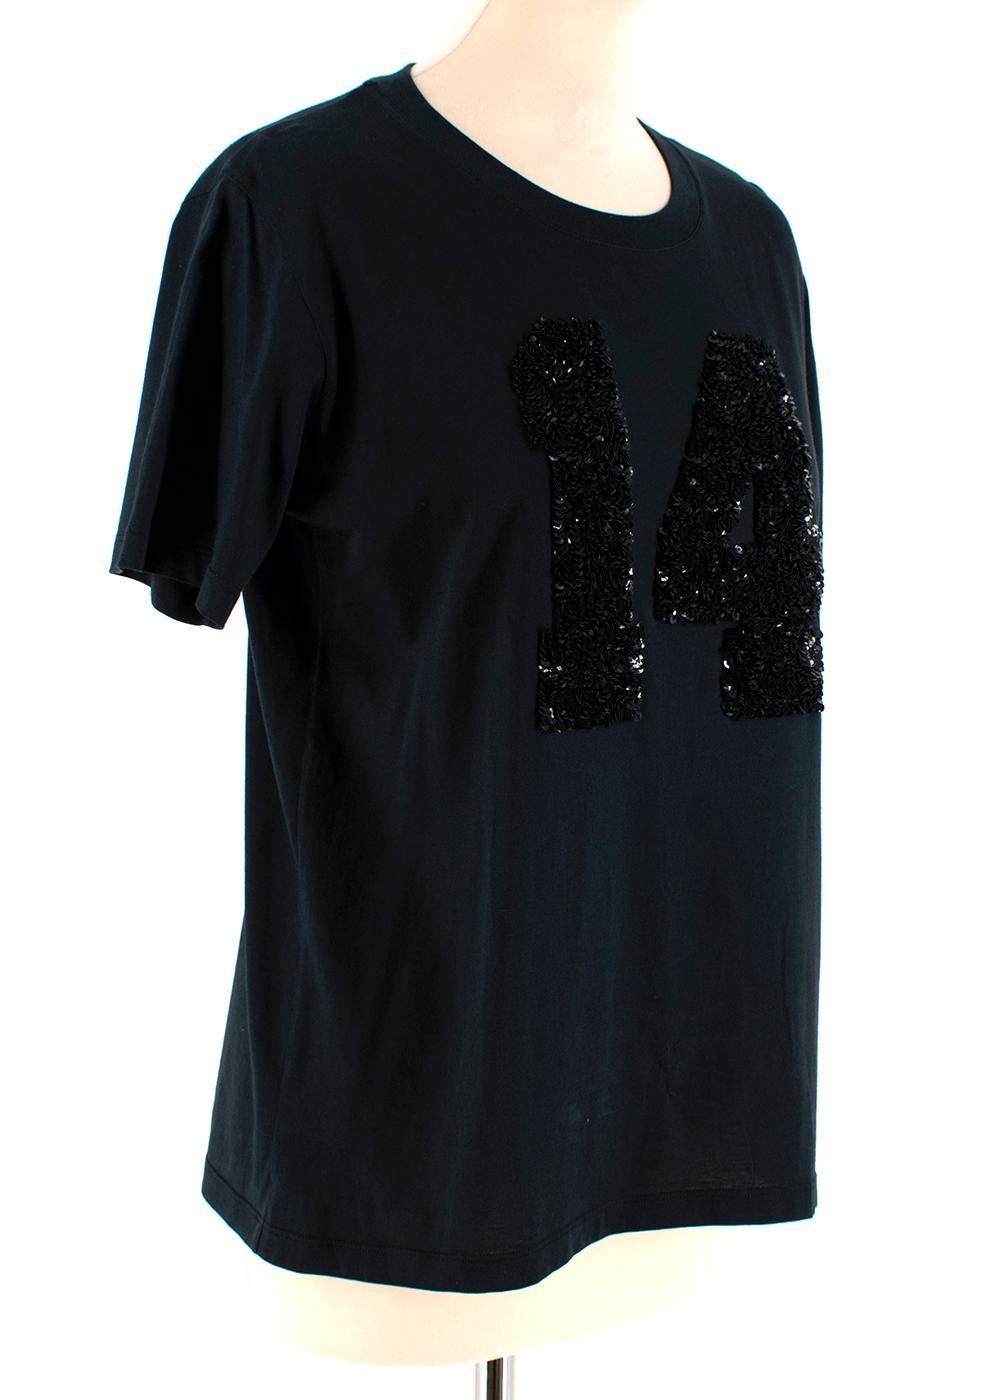 Louis Vuitton Black Cotton 'Paris' 14 Sequin Embellished T-shirt

- Sequin Embellishment to front and back 
- Rounded Neckline 
- Straight Hemline
- Short-Sleeved

Materials 
100% Cotton 

Dry Clean Only 

Made in Italy 

Shoulders: 10cm
Sleeves: